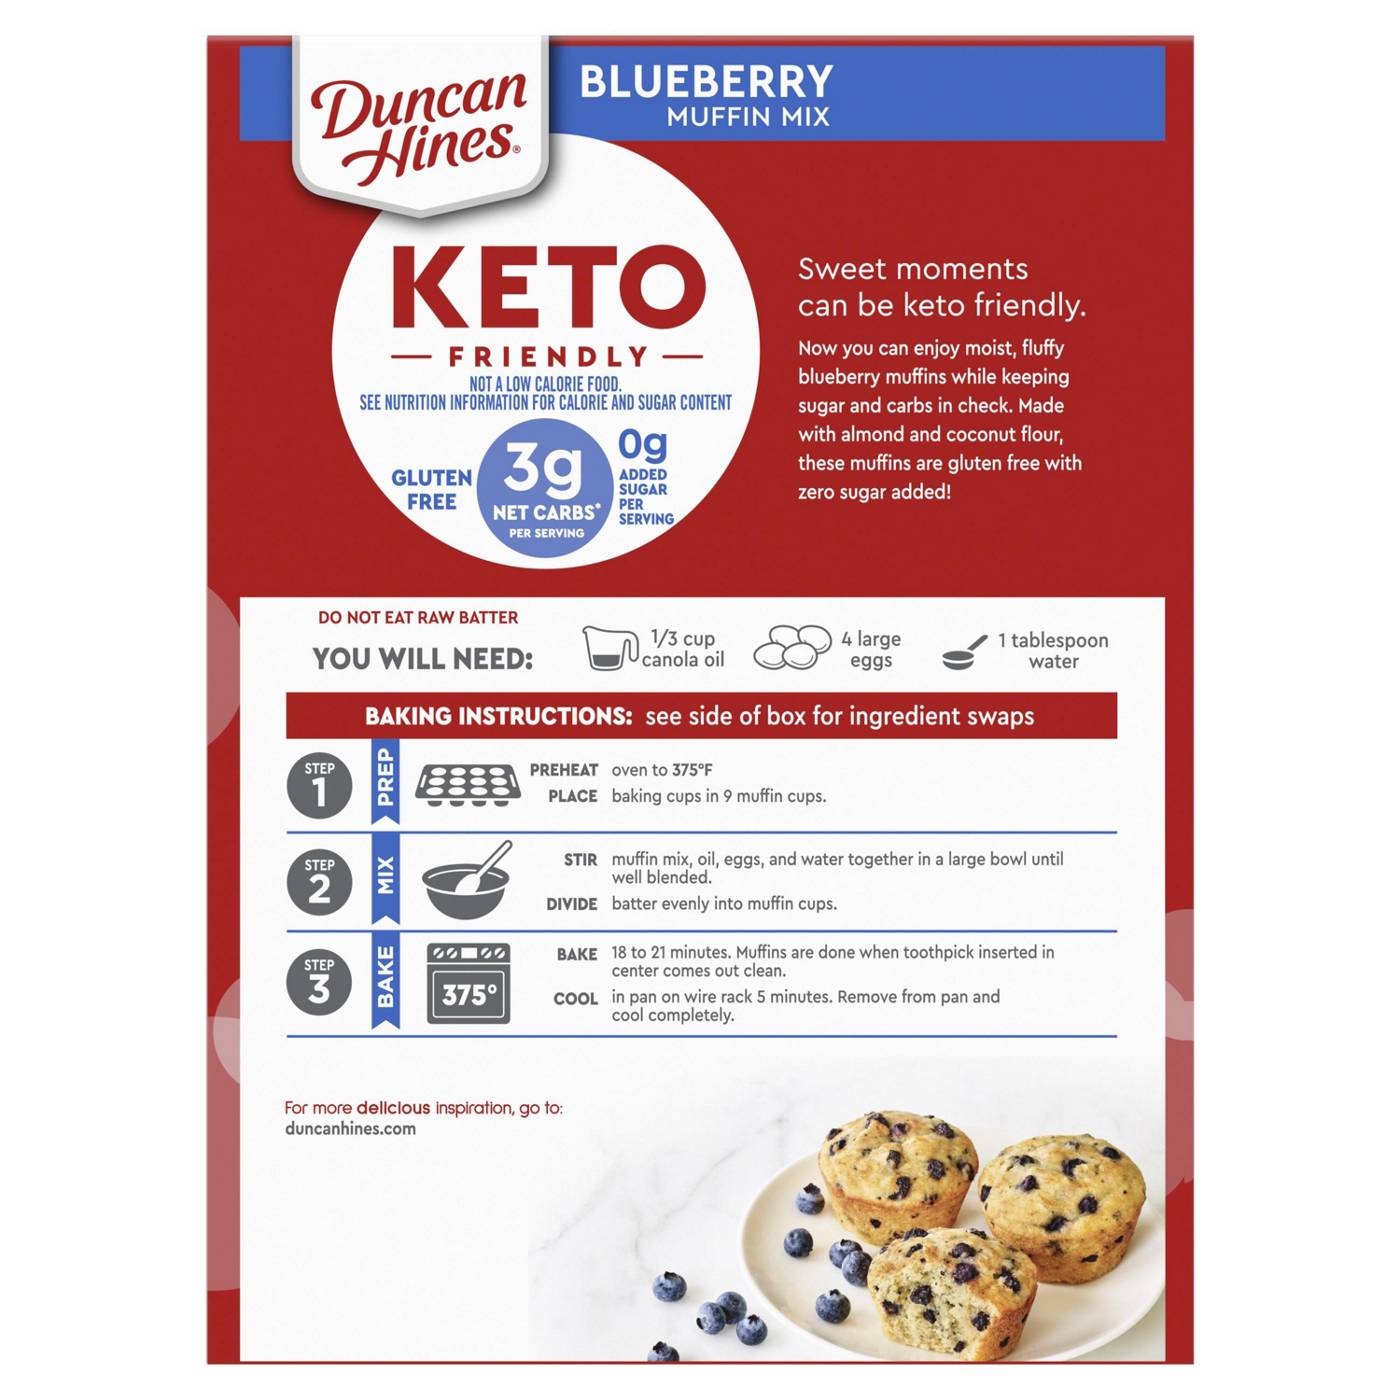 Duncan Hines Keto Friendly Blueberry Muffin Mix; image 3 of 5